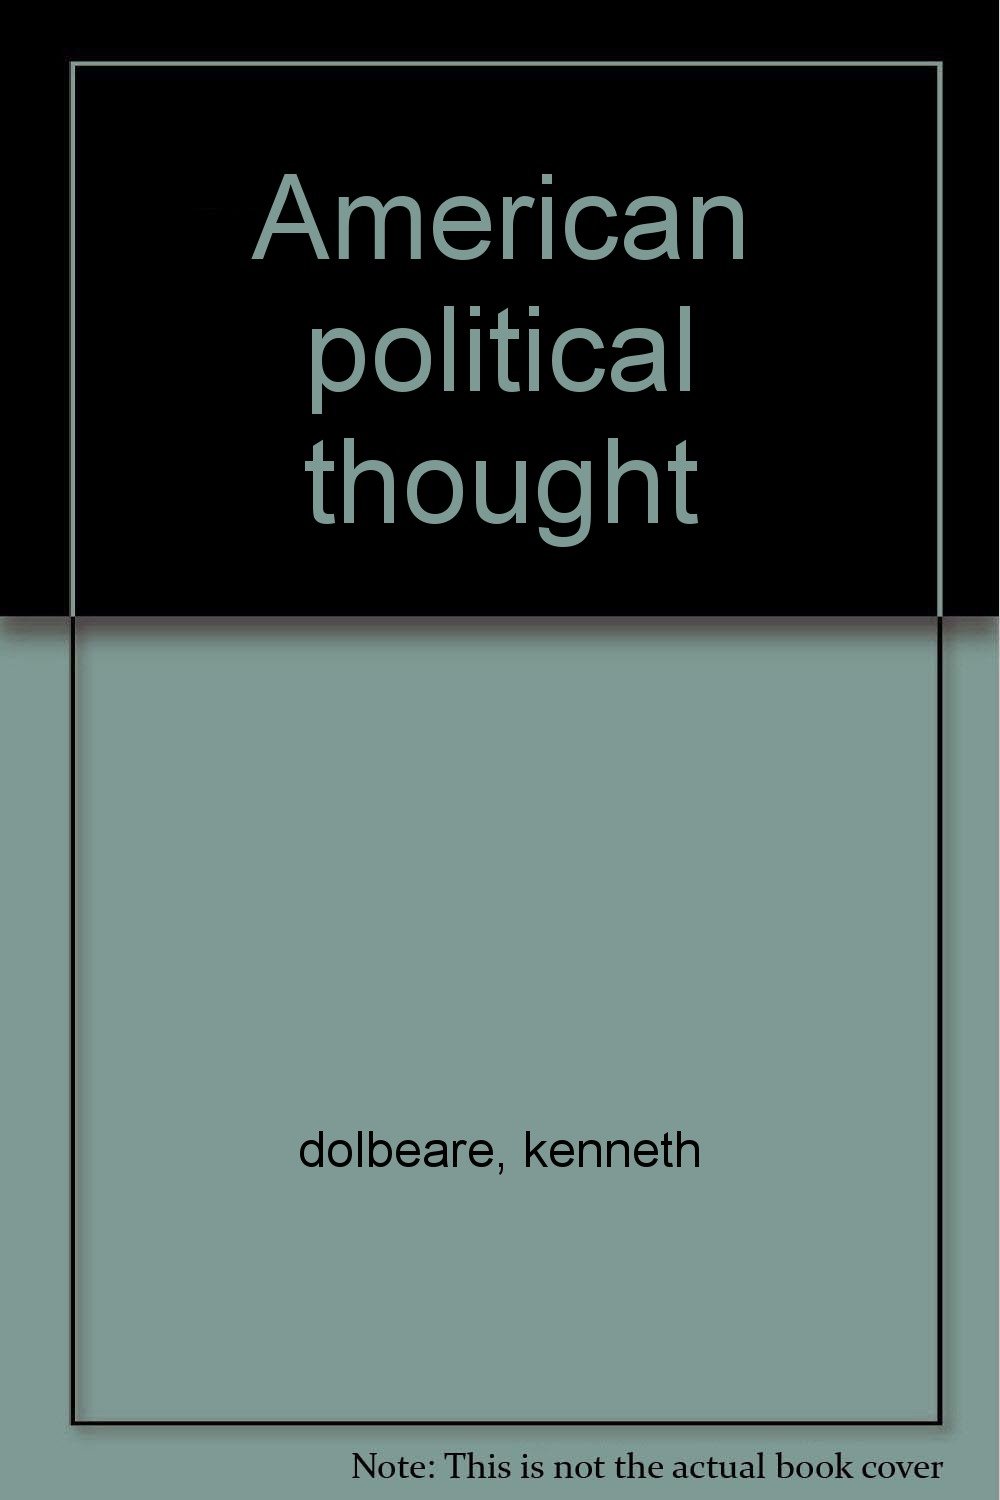 American political thought magazine reviews